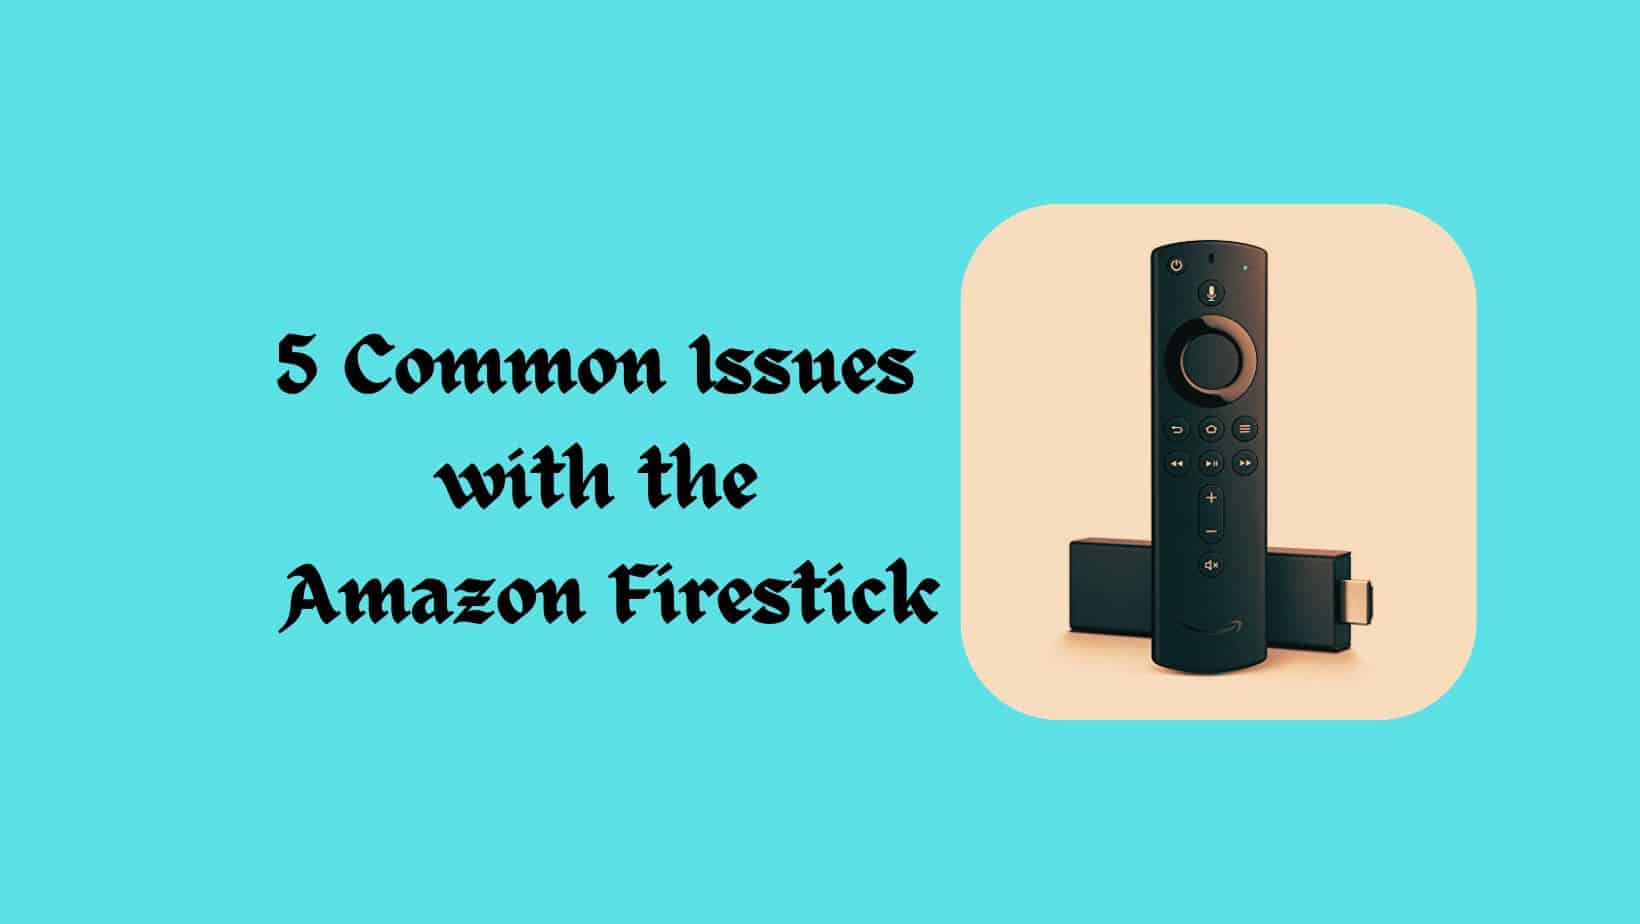 5 Common Issues with the Amazon Firestick & How to Fix Them